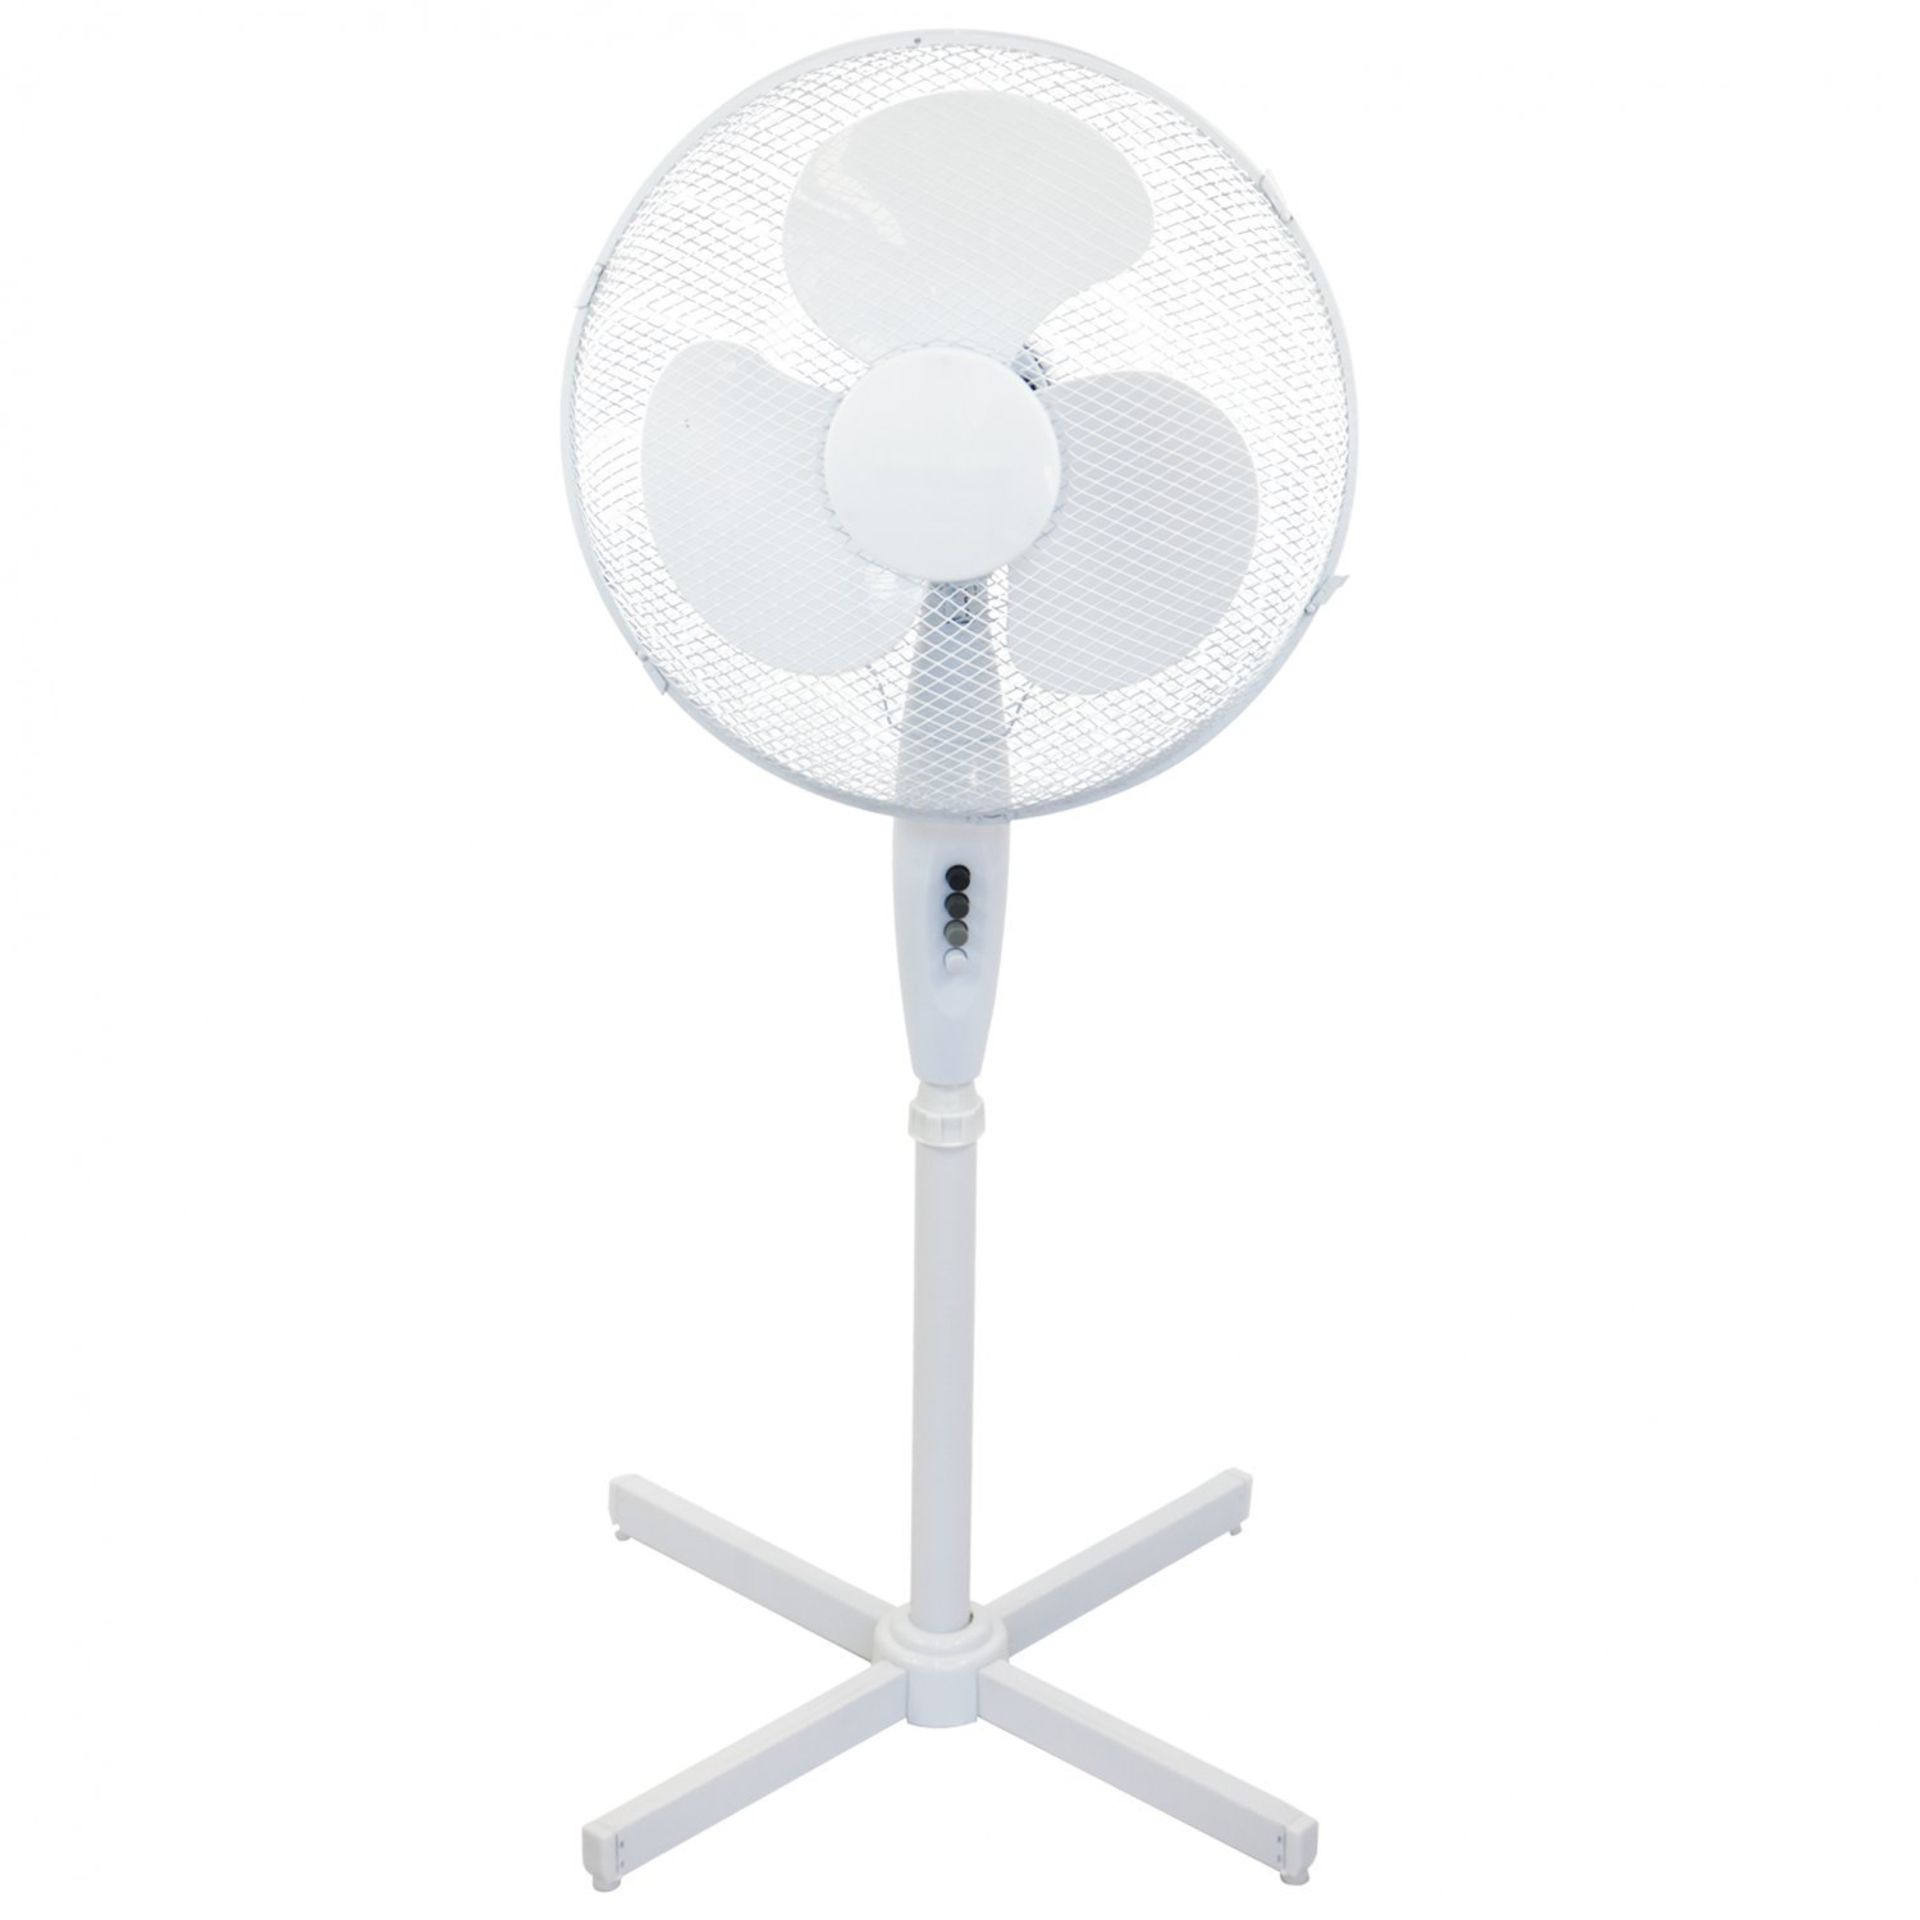 (G37) 16" Oscillating Pedestal Electric Fan 3 Speed Push Button Speed Control Cable Length Ap... - Image 3 of 3